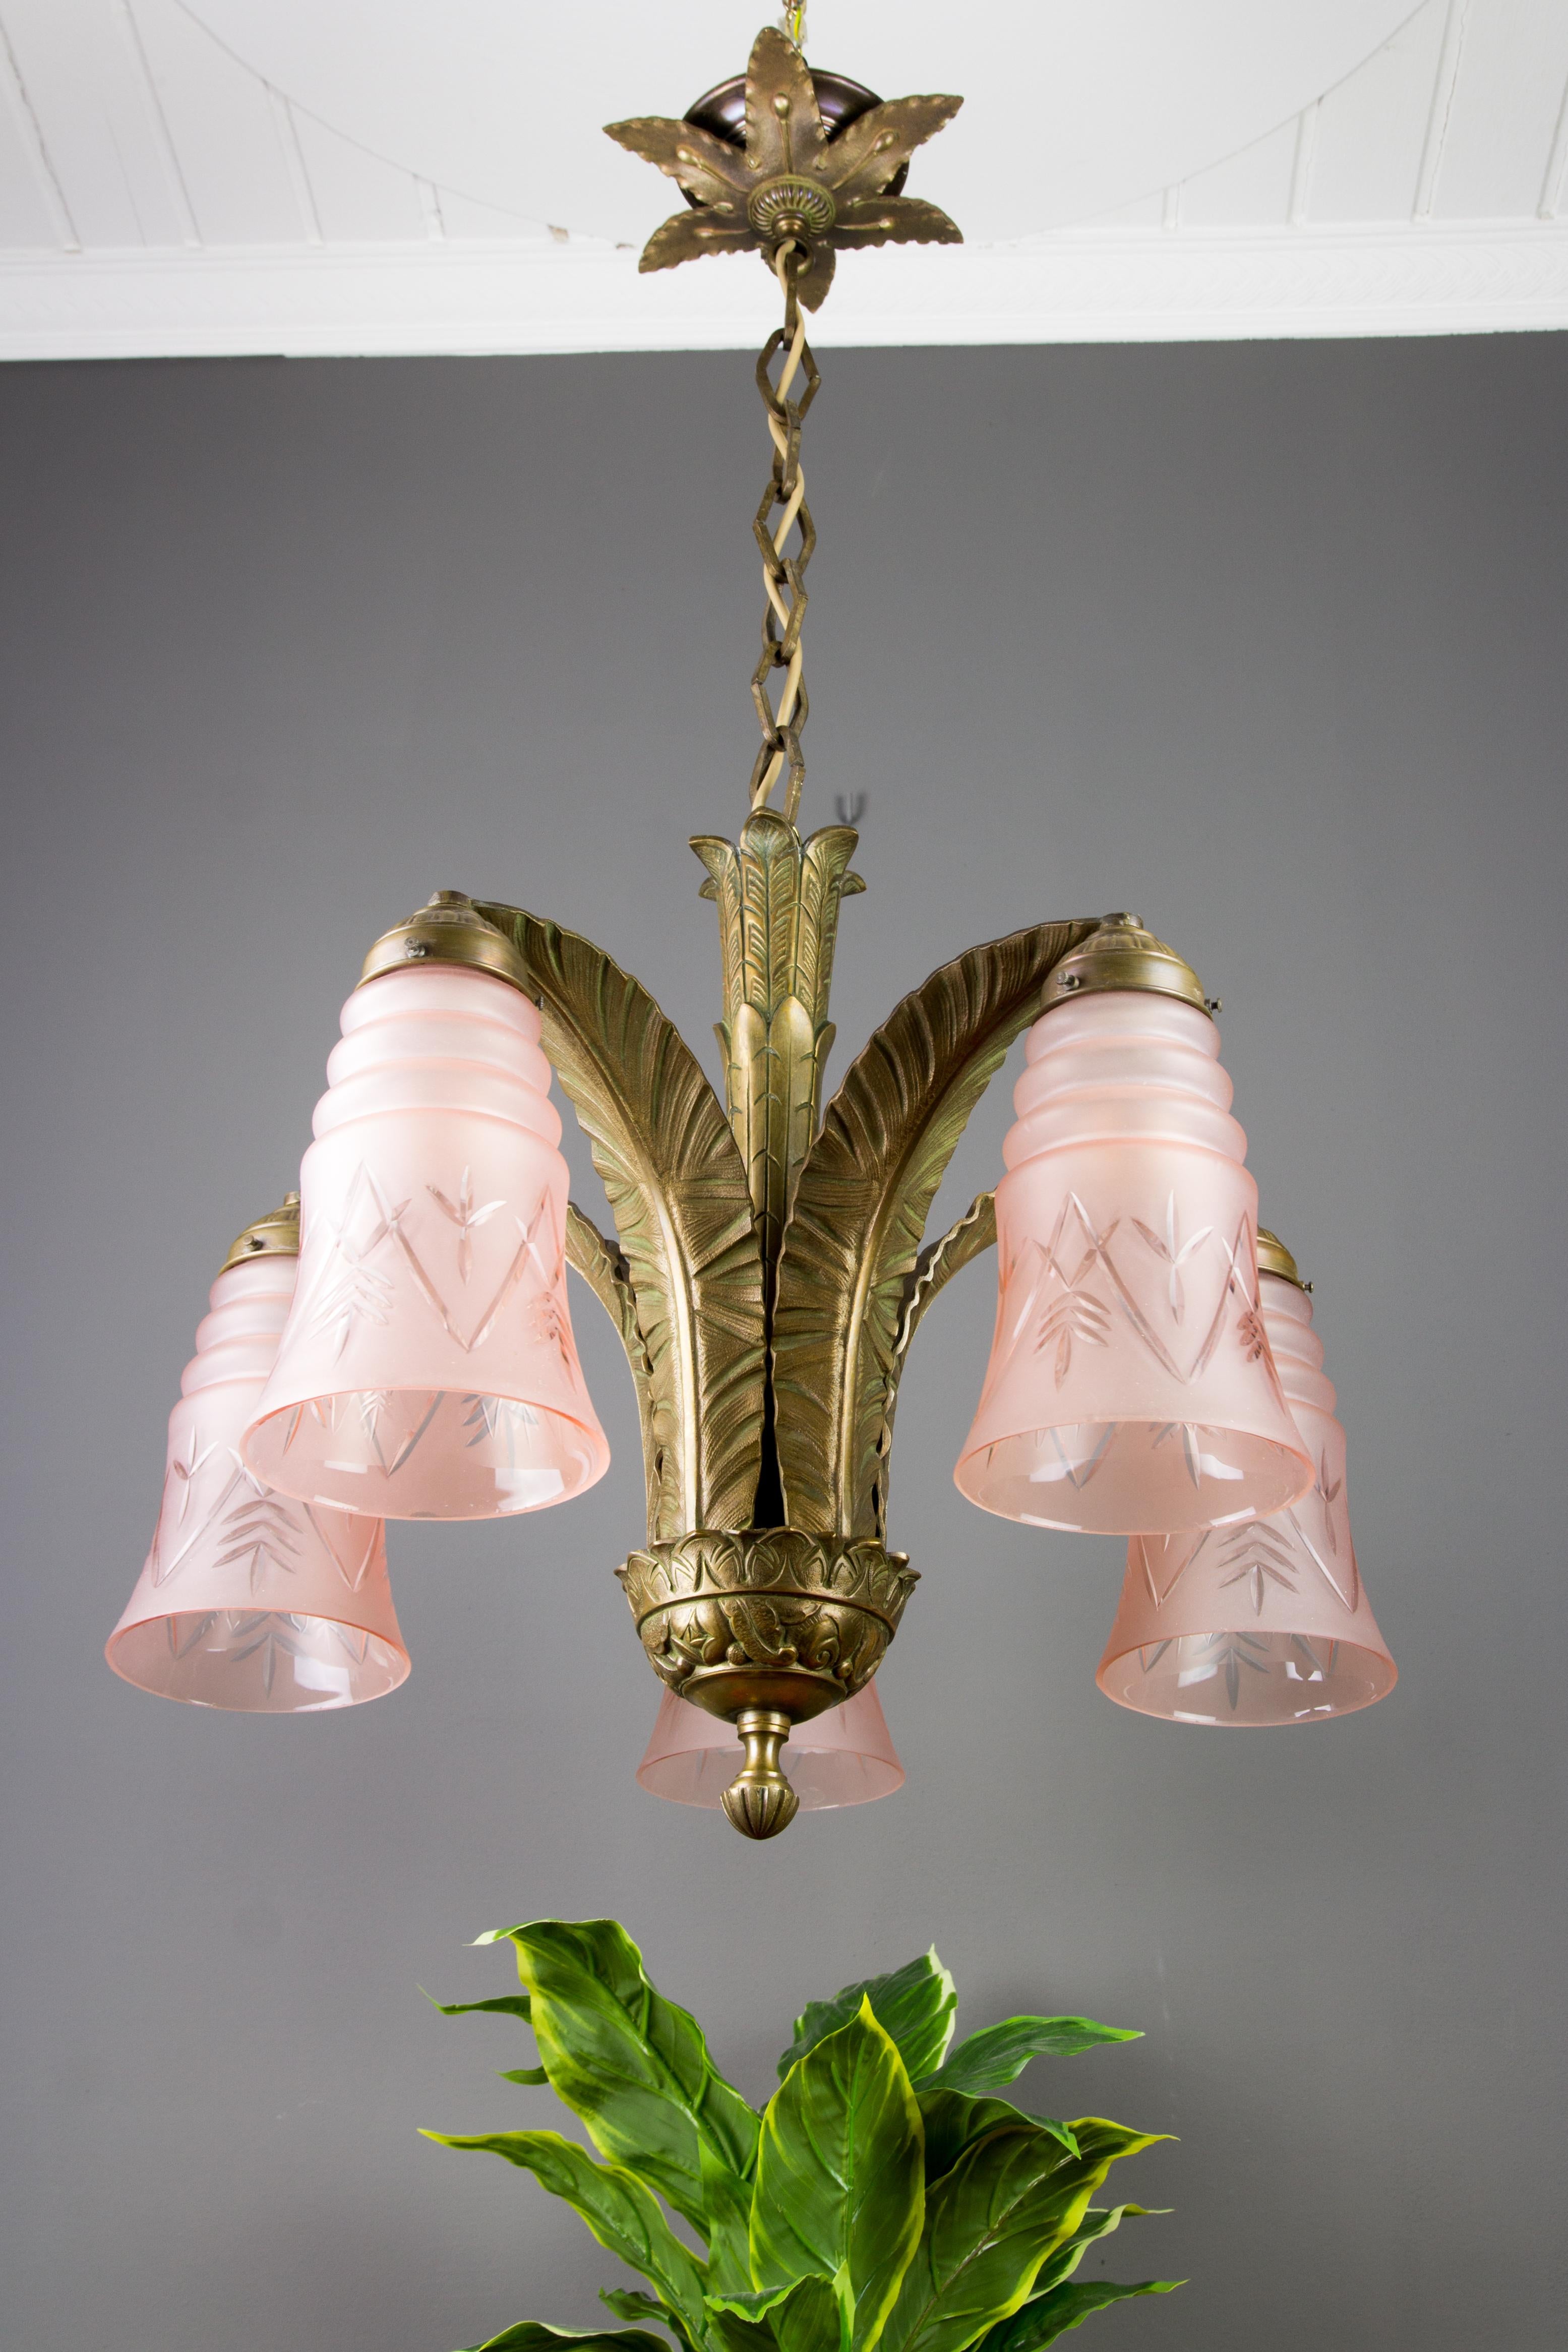 An adorable French Art Deco bronze chandelier, made in the 1930s. Five large bronze arms in the shape of big leaves are holding five pink frosted bell-shaped glass shades with engraved geometrical ornaments. 
The canopy is trimmed with flower